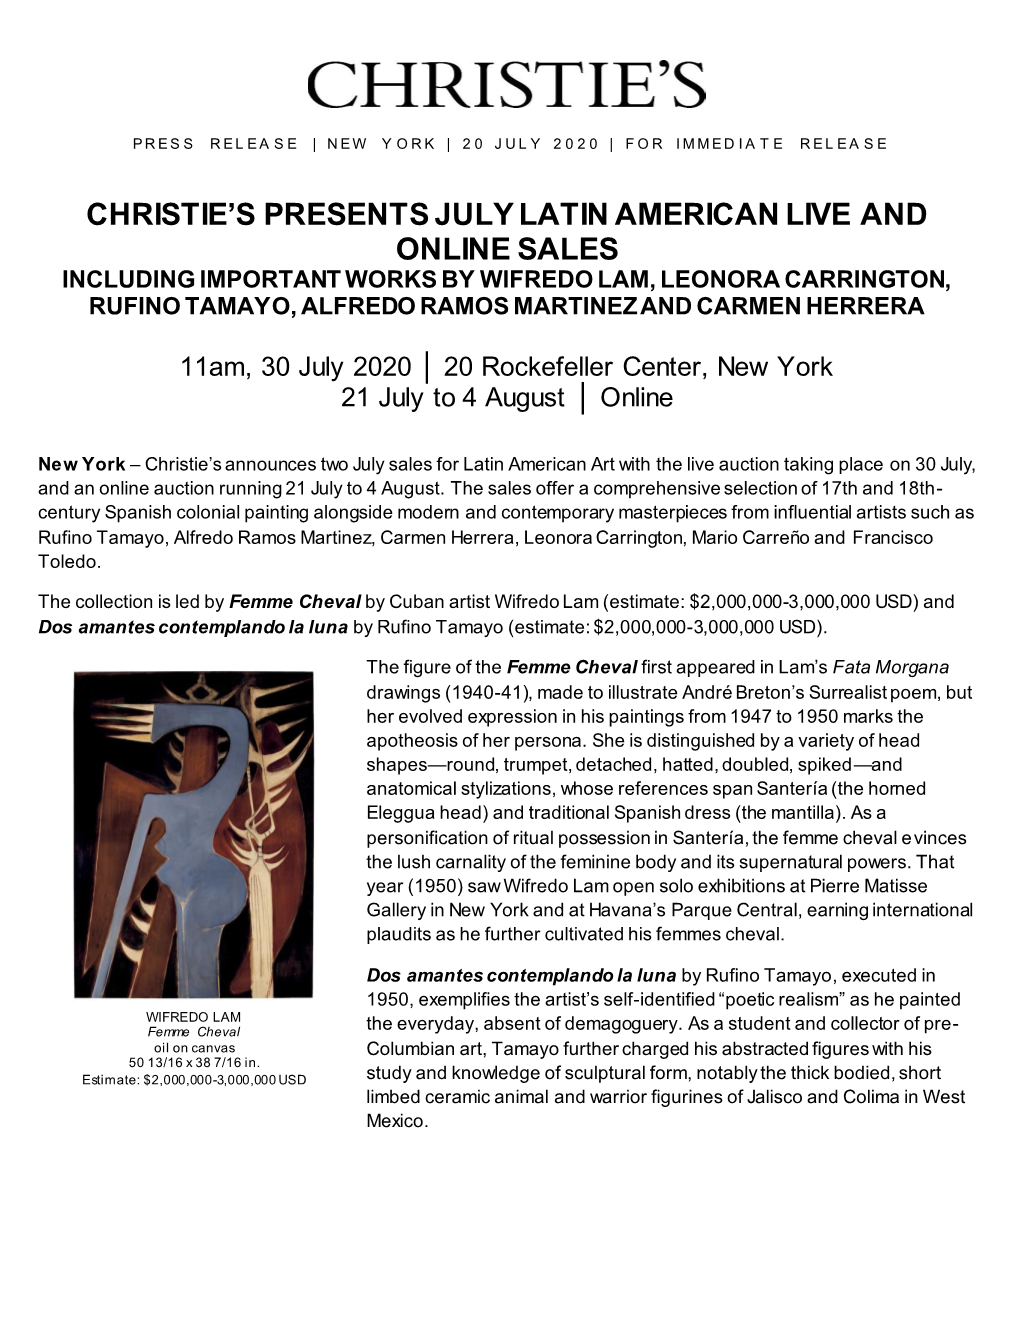 Christie's Presents July Latin American Live and Online